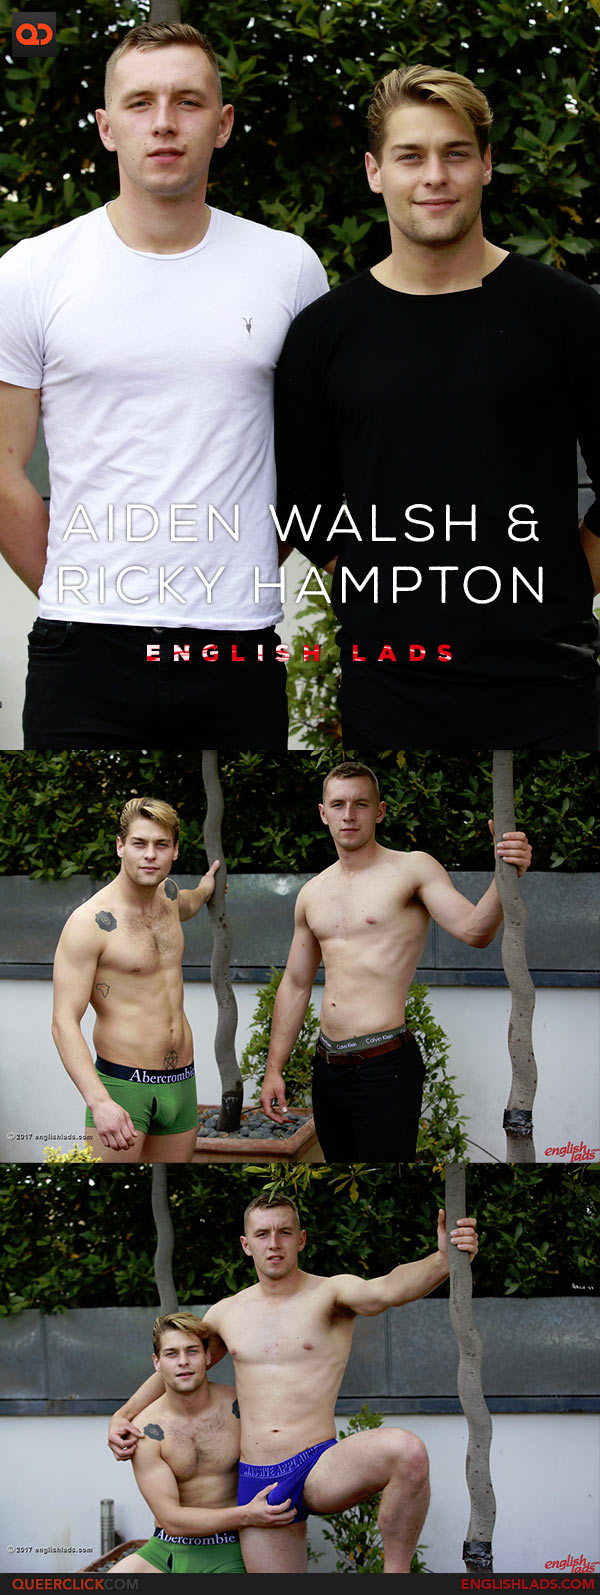 English Lads: Young Straight Hunk Aiden Walsh is Back and Treats Ricky Hampton to his Big 8 Inch Uncut Erect Cock!